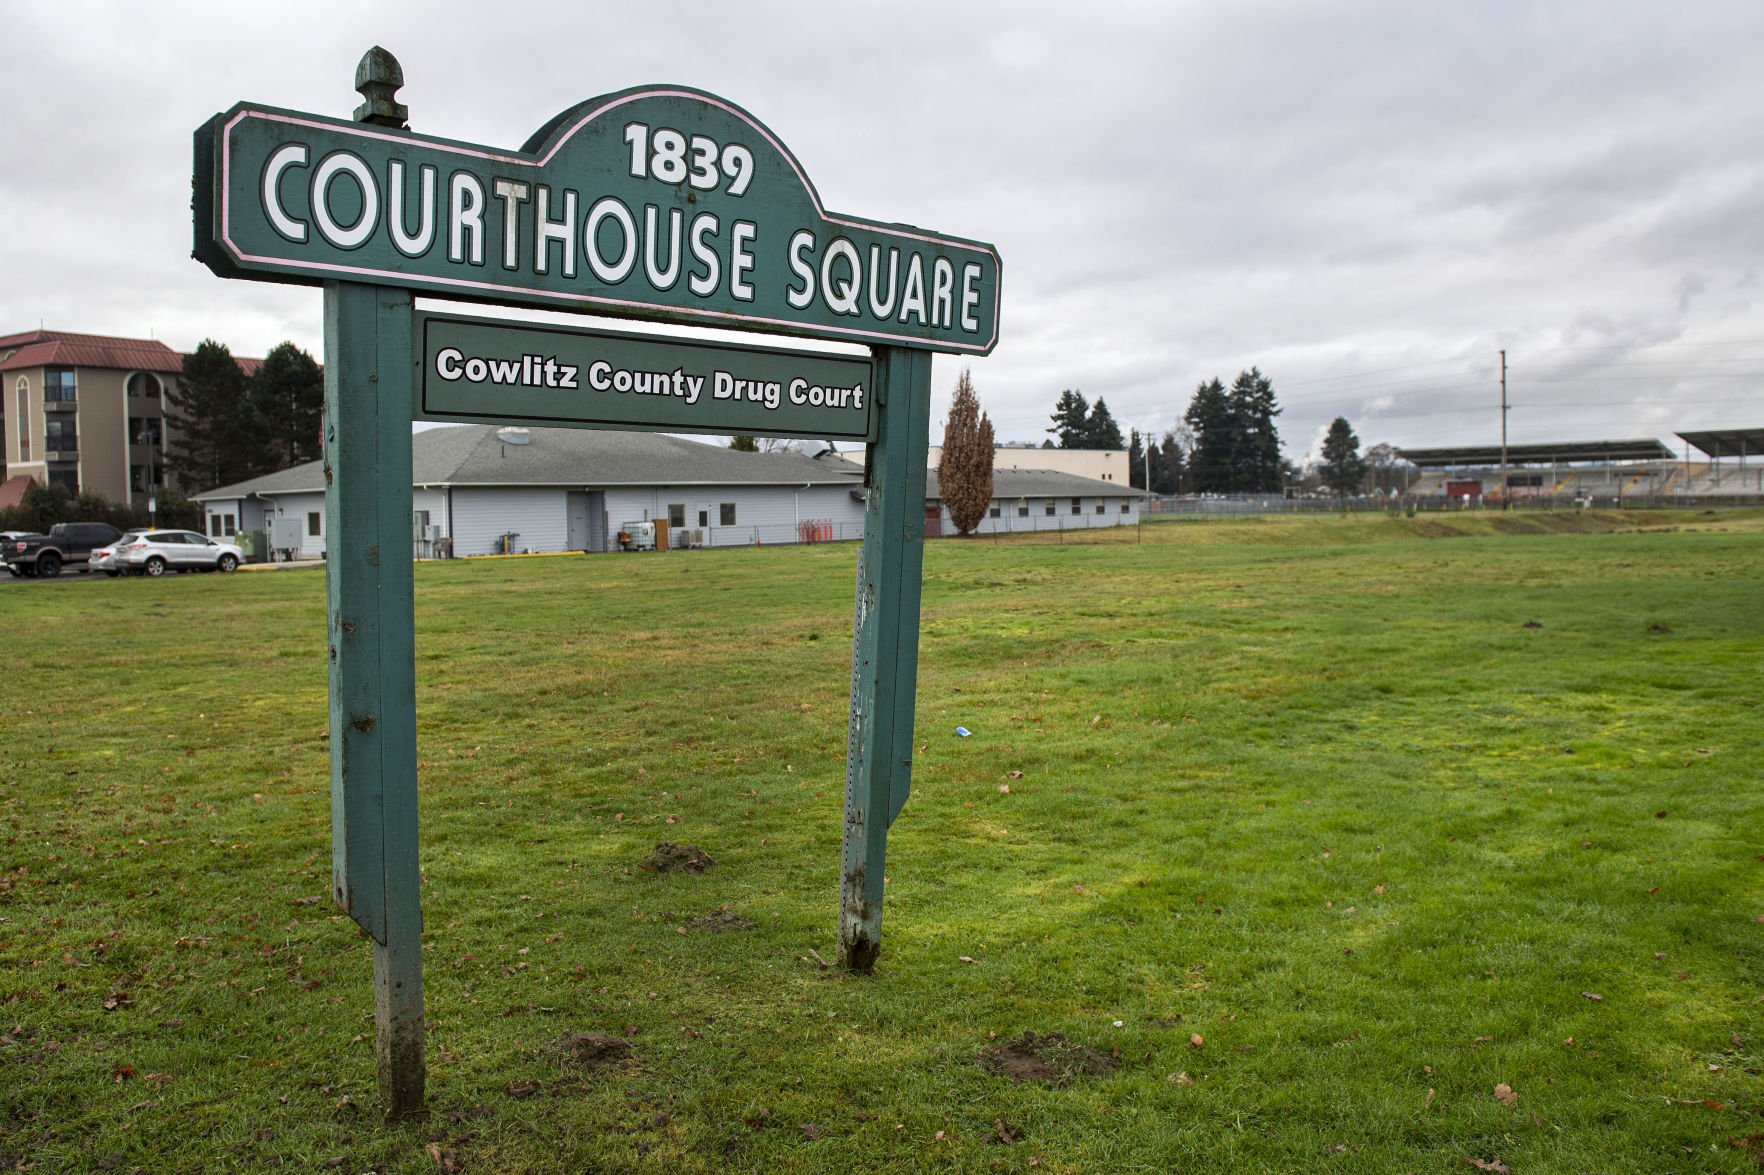 cowlitz county jail roster releases